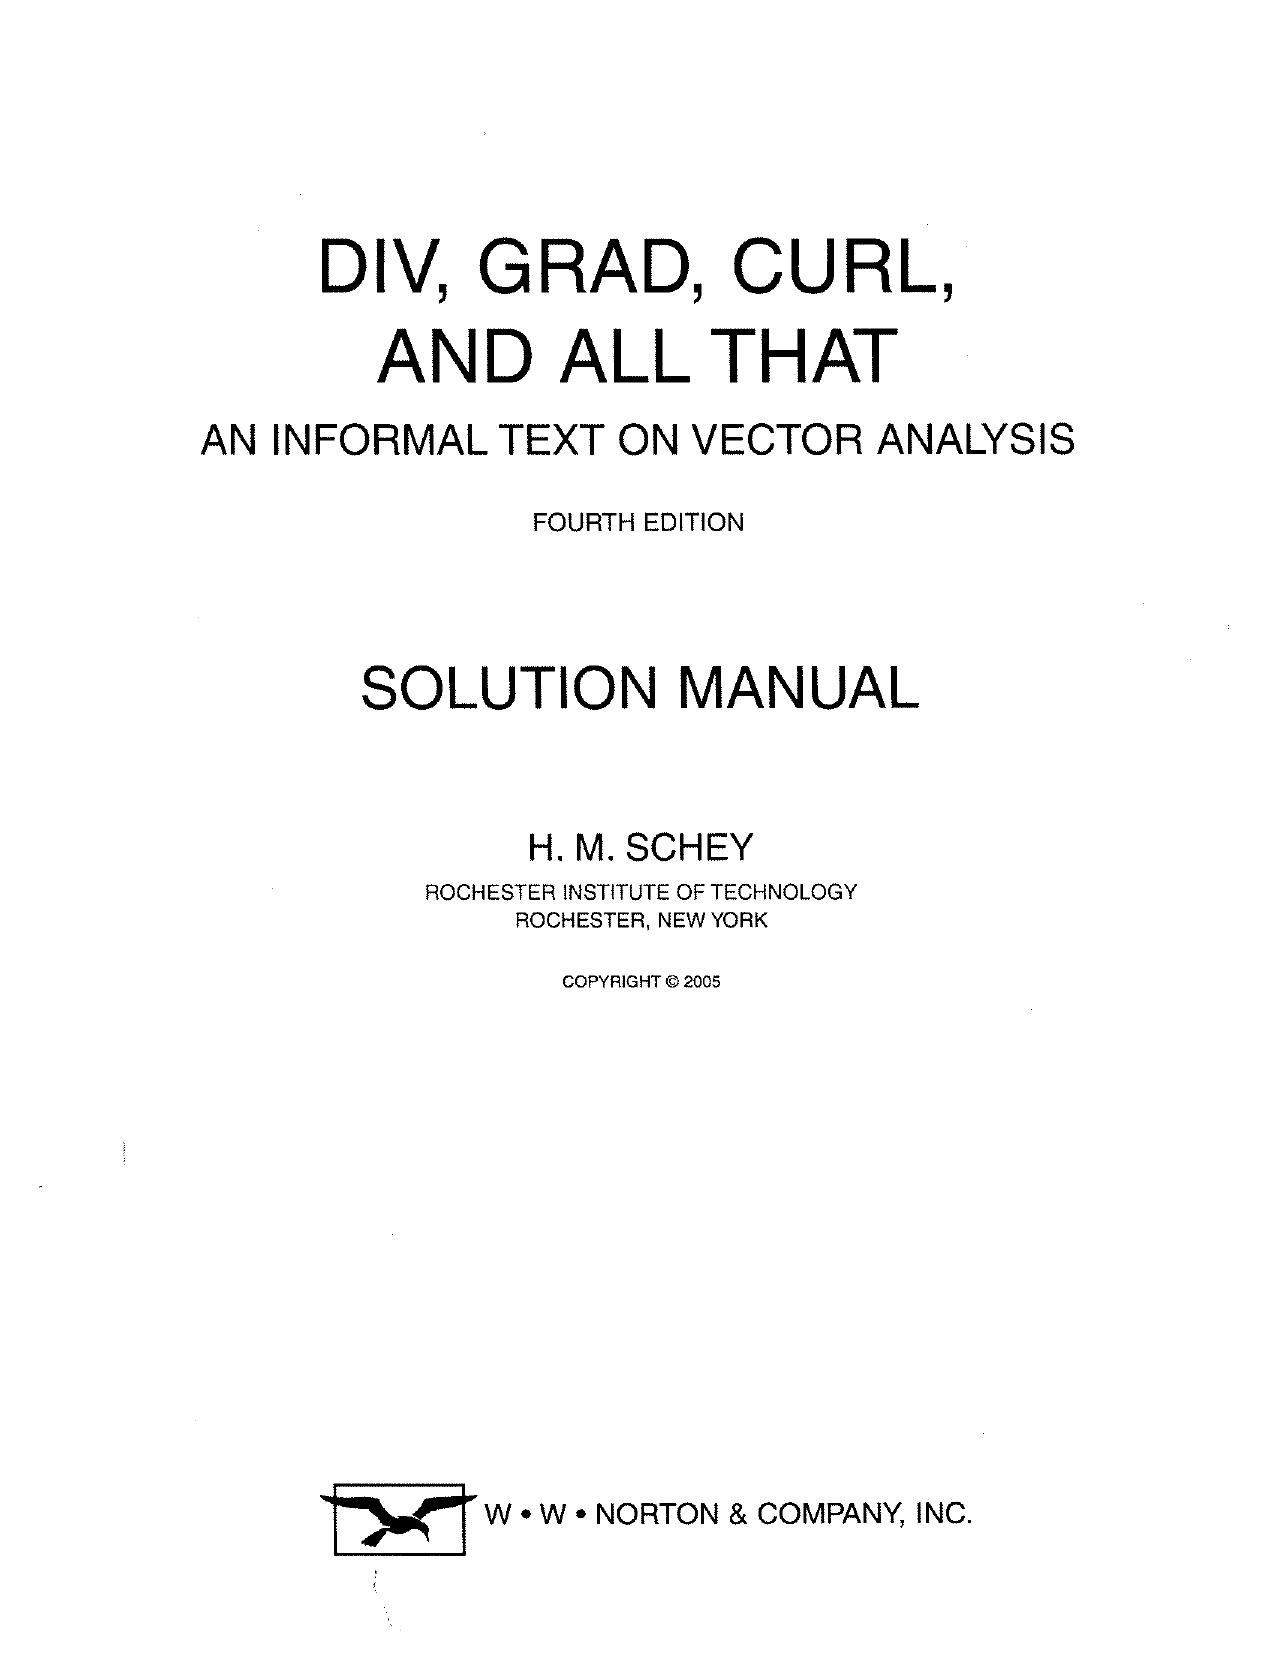 Solution Manual for Div Grad Curl and All That 4th Edition